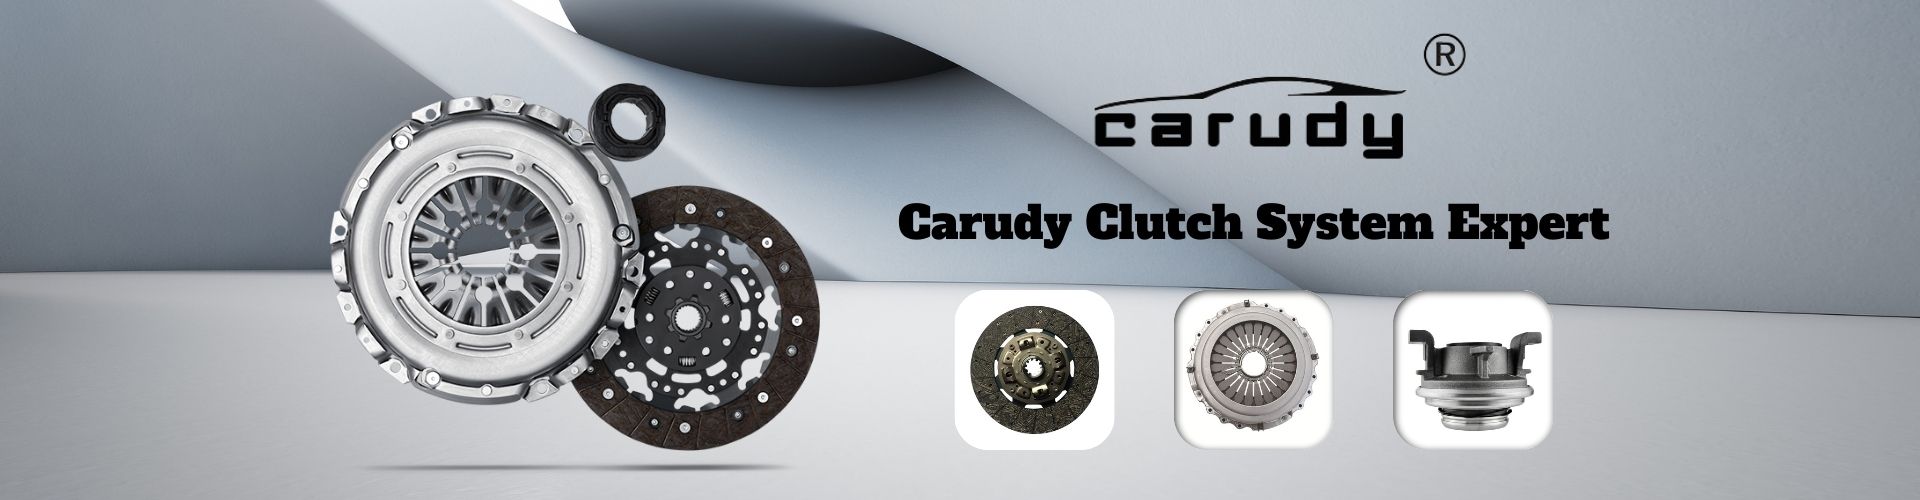 Buy and wholesale clutch disc,fclutch pressure plate,with competitive price from carudy - one of leading clutch system parts,clutch and pressure plate kit suppliers in China.